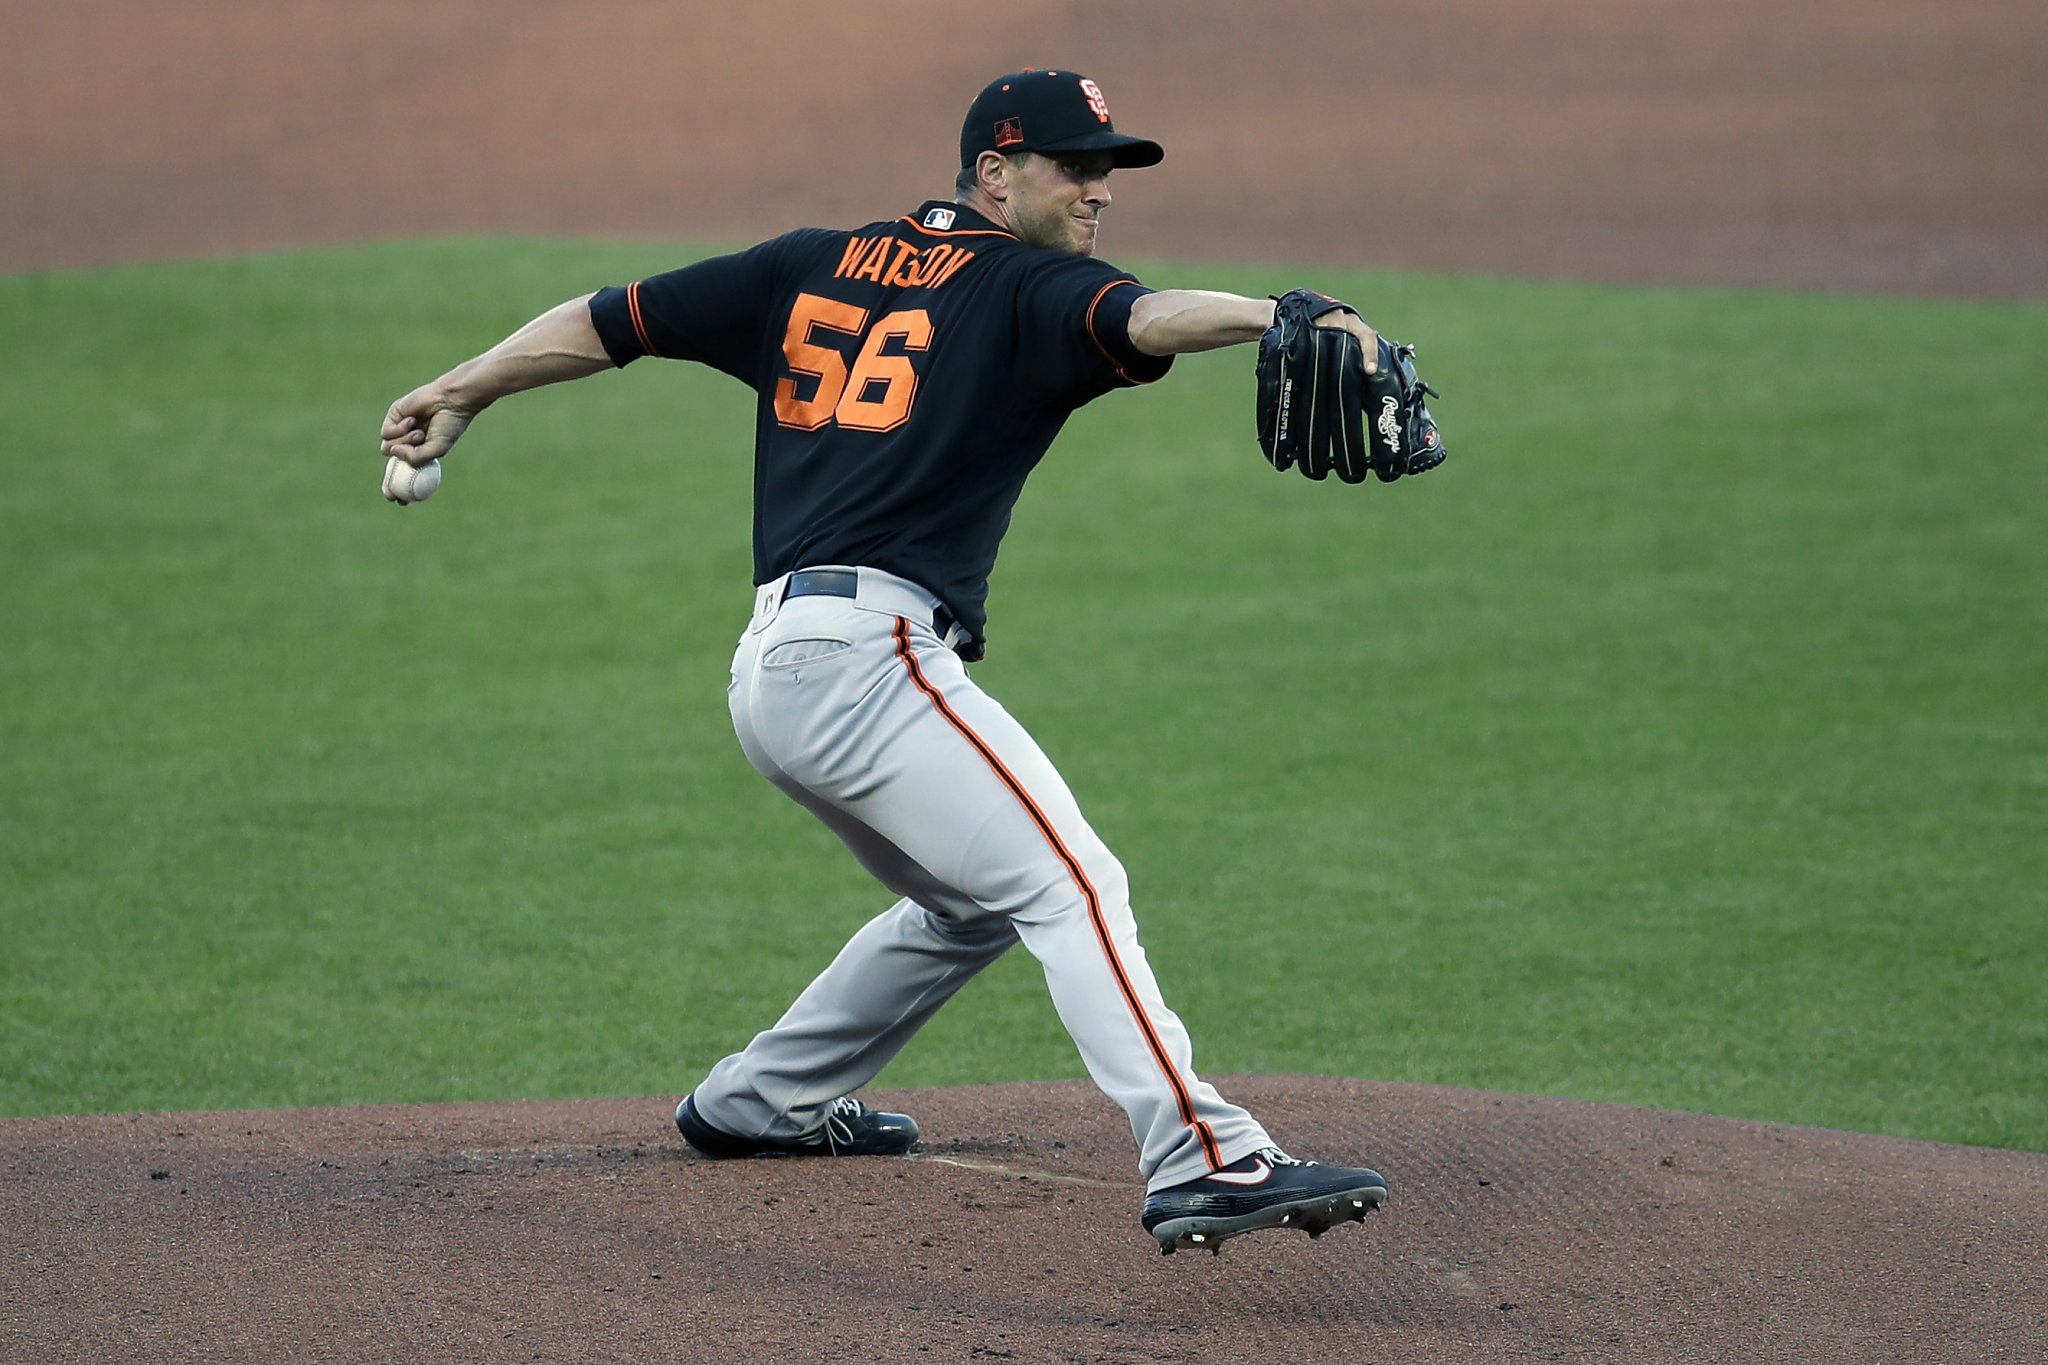 Giants' Tony Watson overcomes shoulder issue, vows to be ready for opener